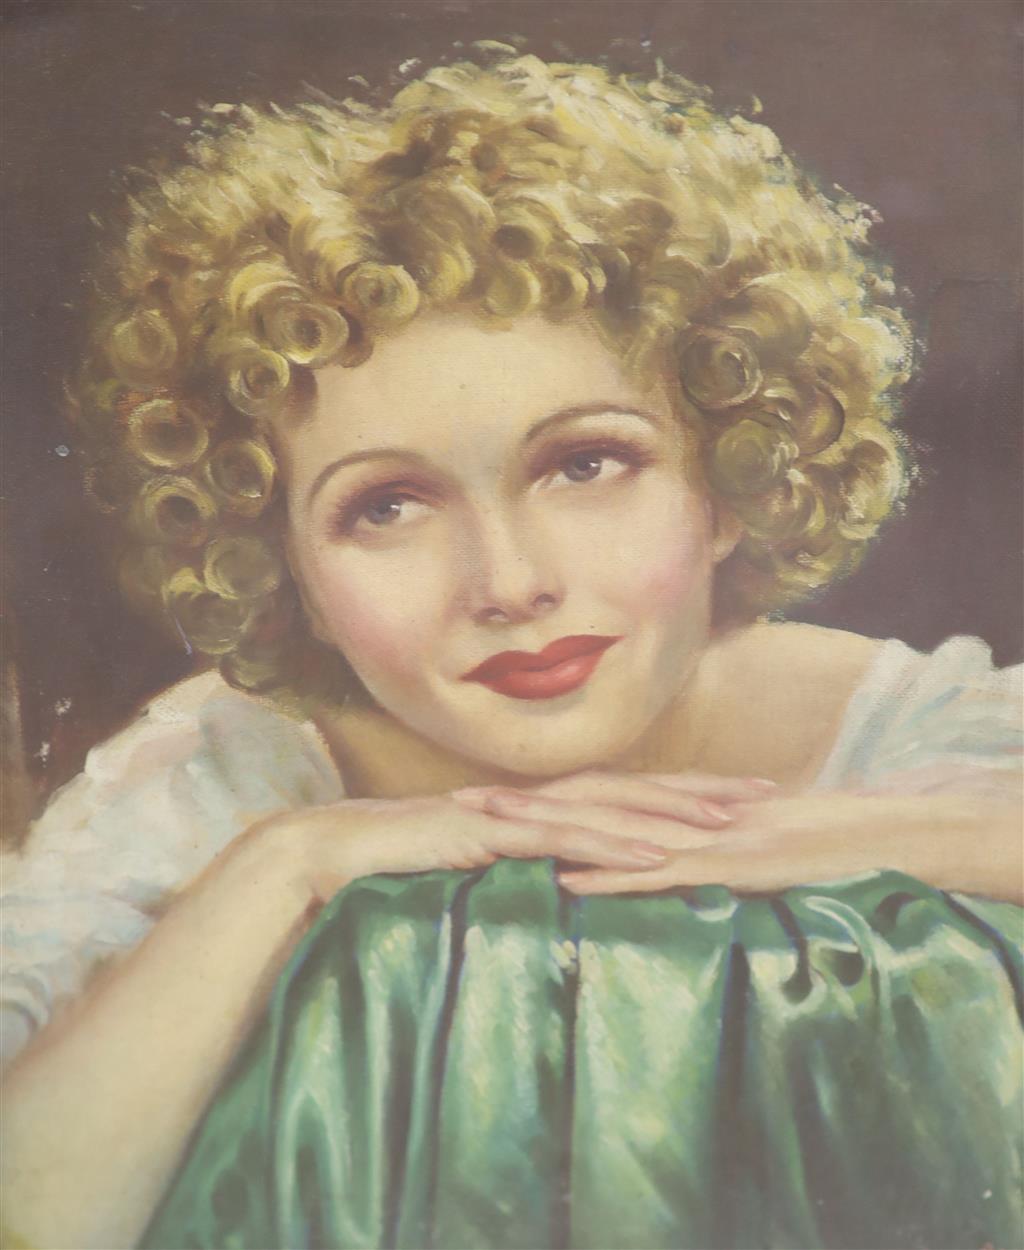 Caiuf, oil on canvas, Portrait of a 1930s film star?, signed and dated 37, 45 x 35cm